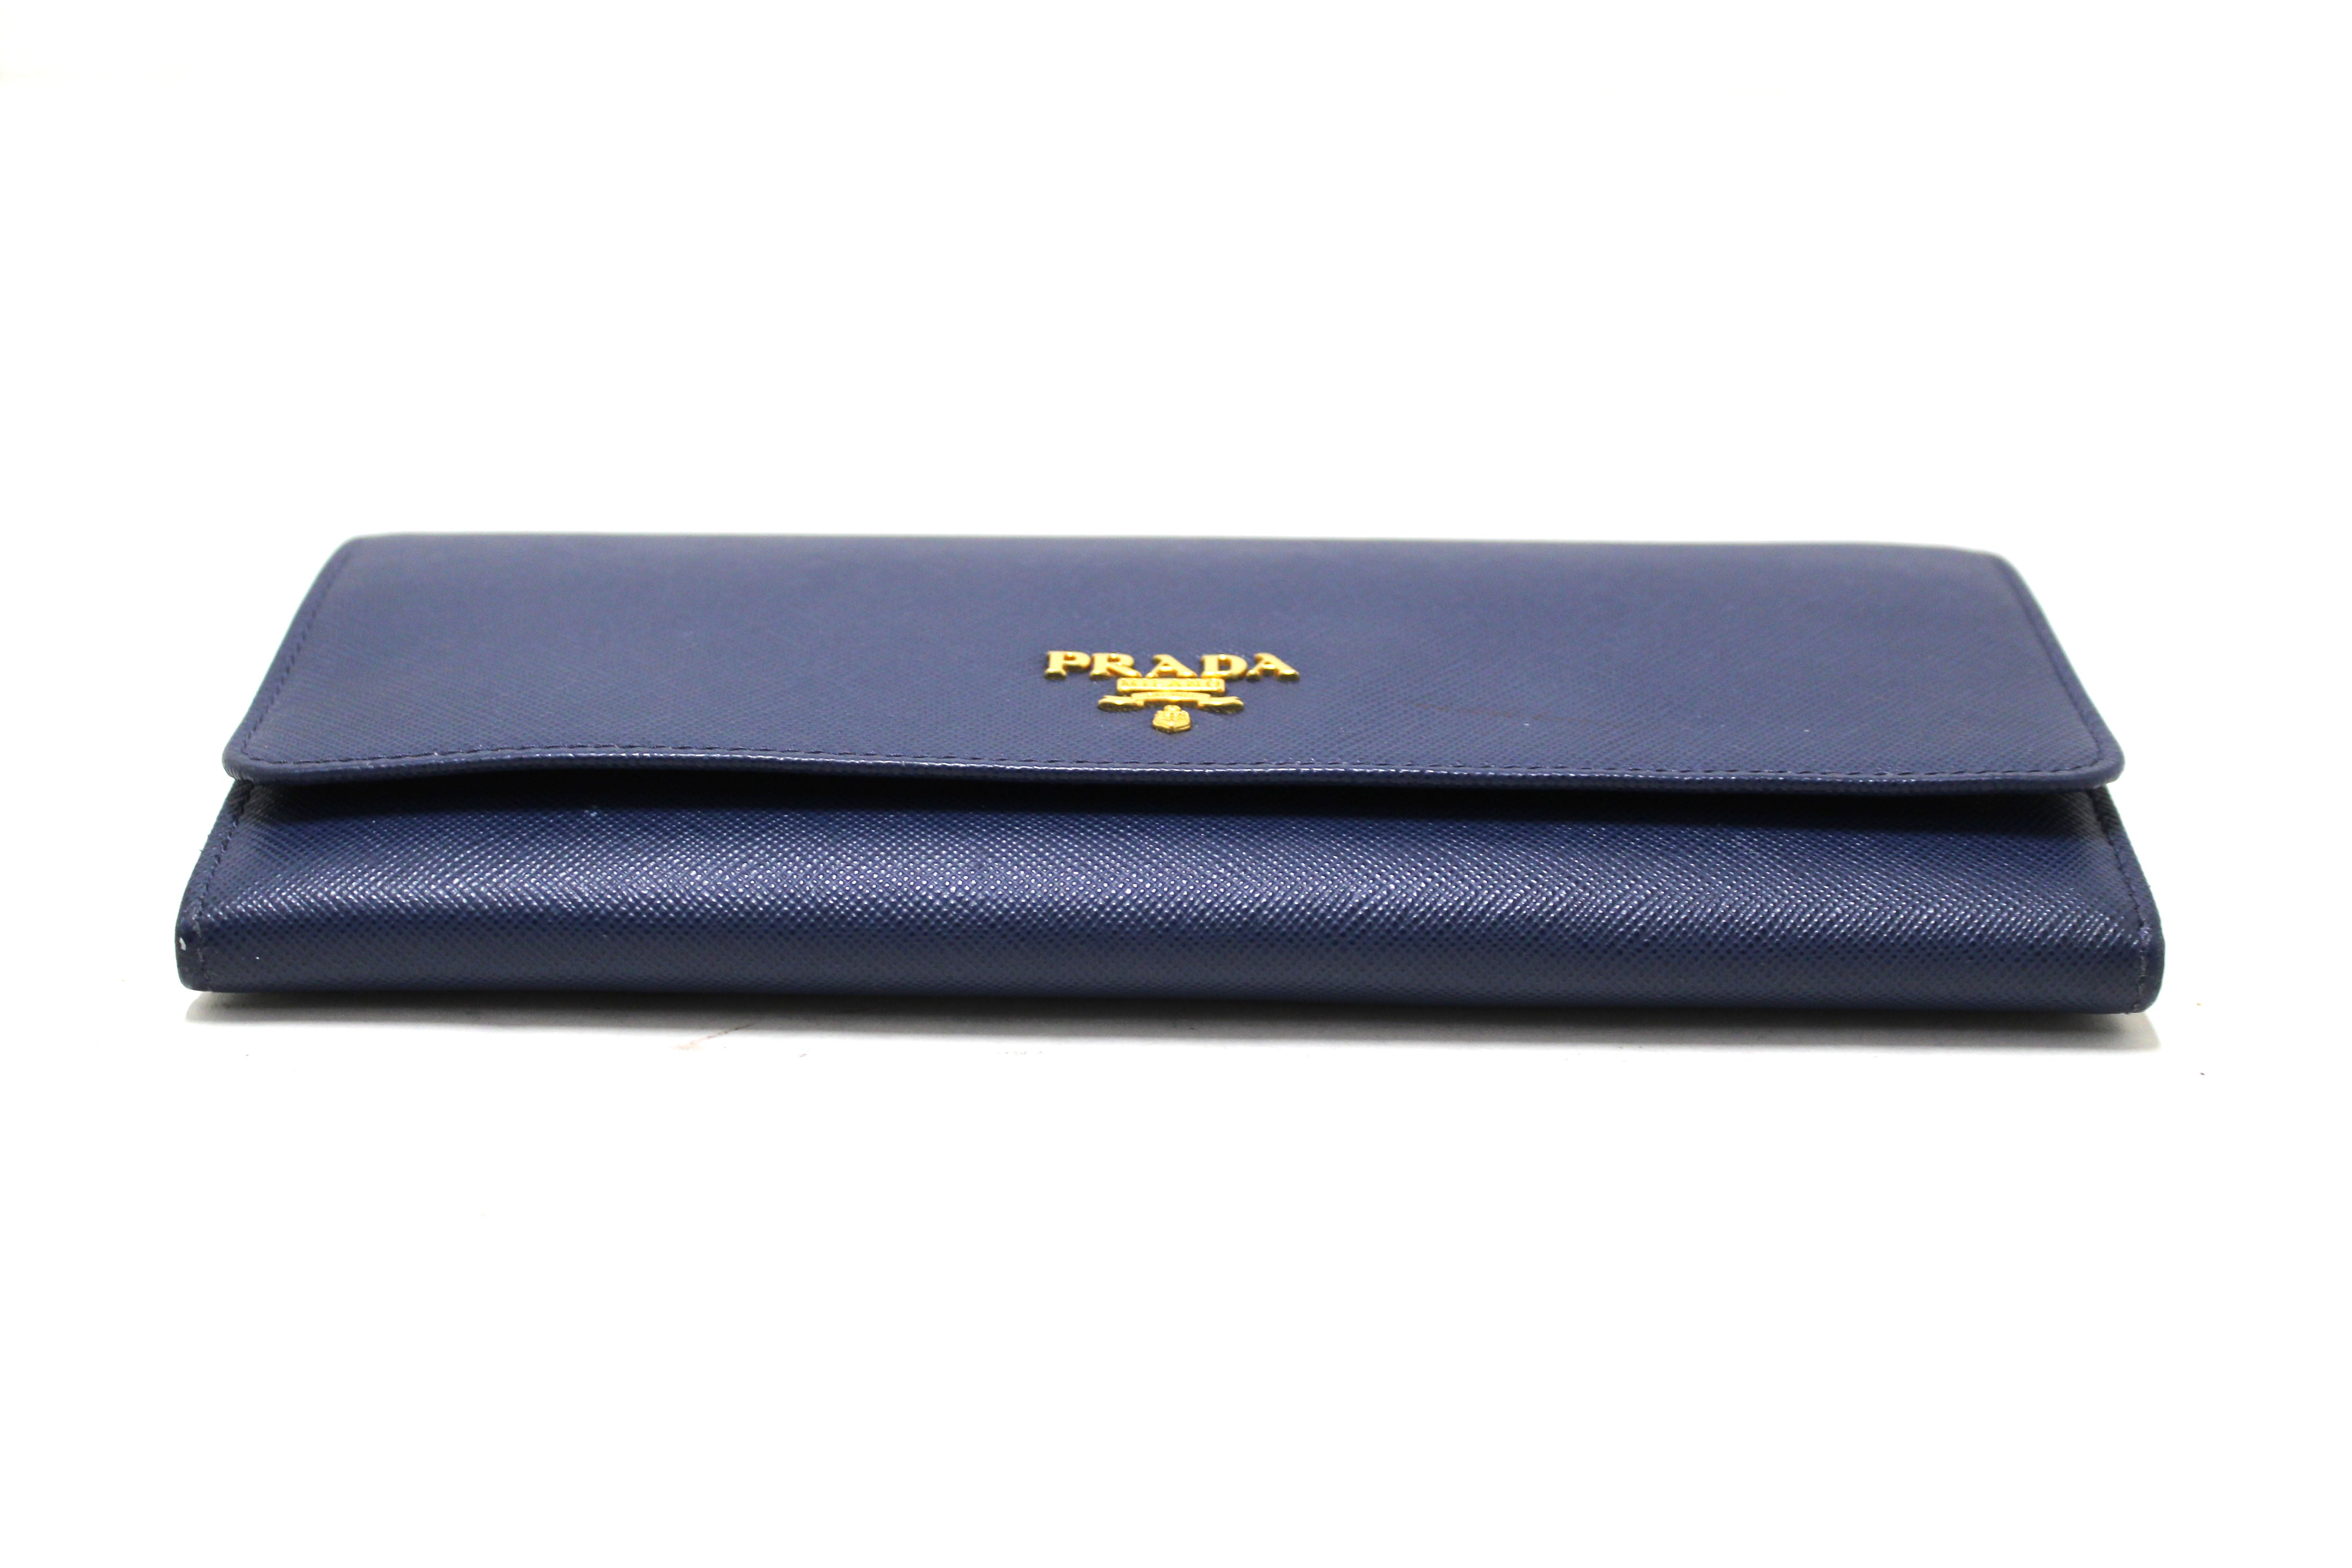 Authentic Prada Blue Saffiano Leather Wallet With Chain